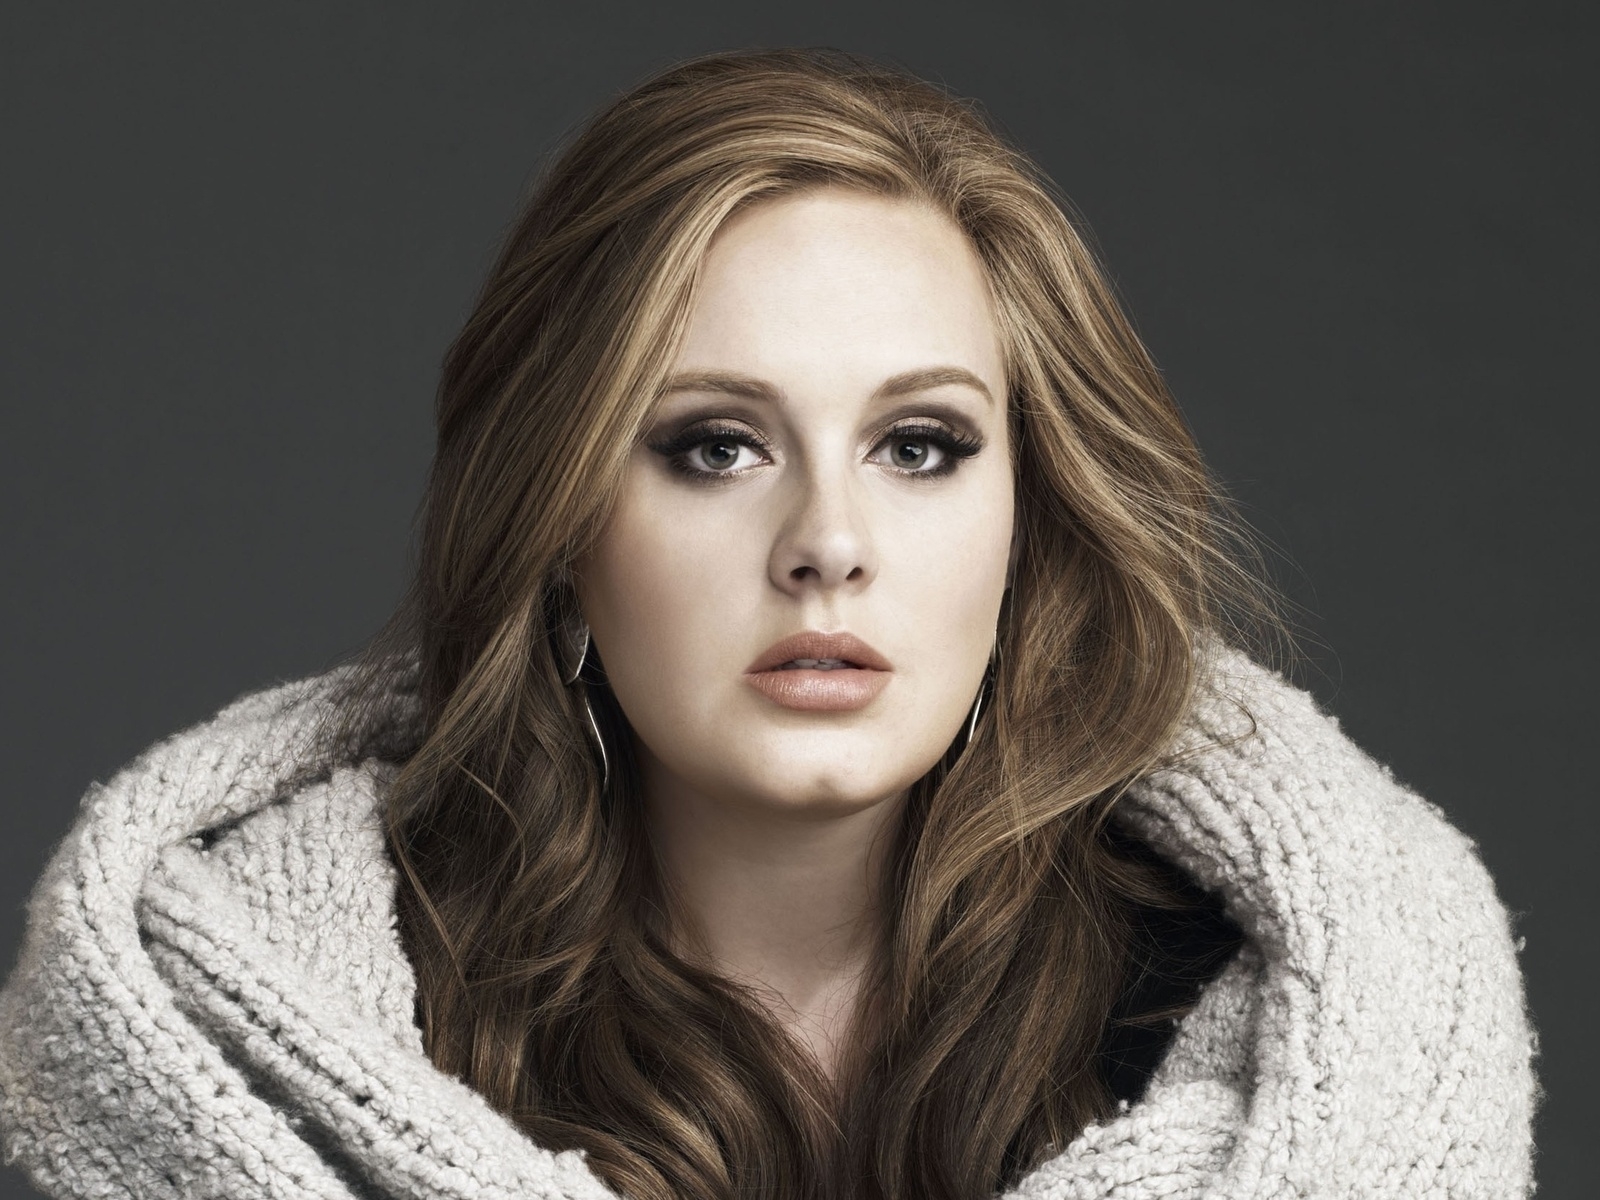 Adele Serious Look for 1600 x 1200 resolution